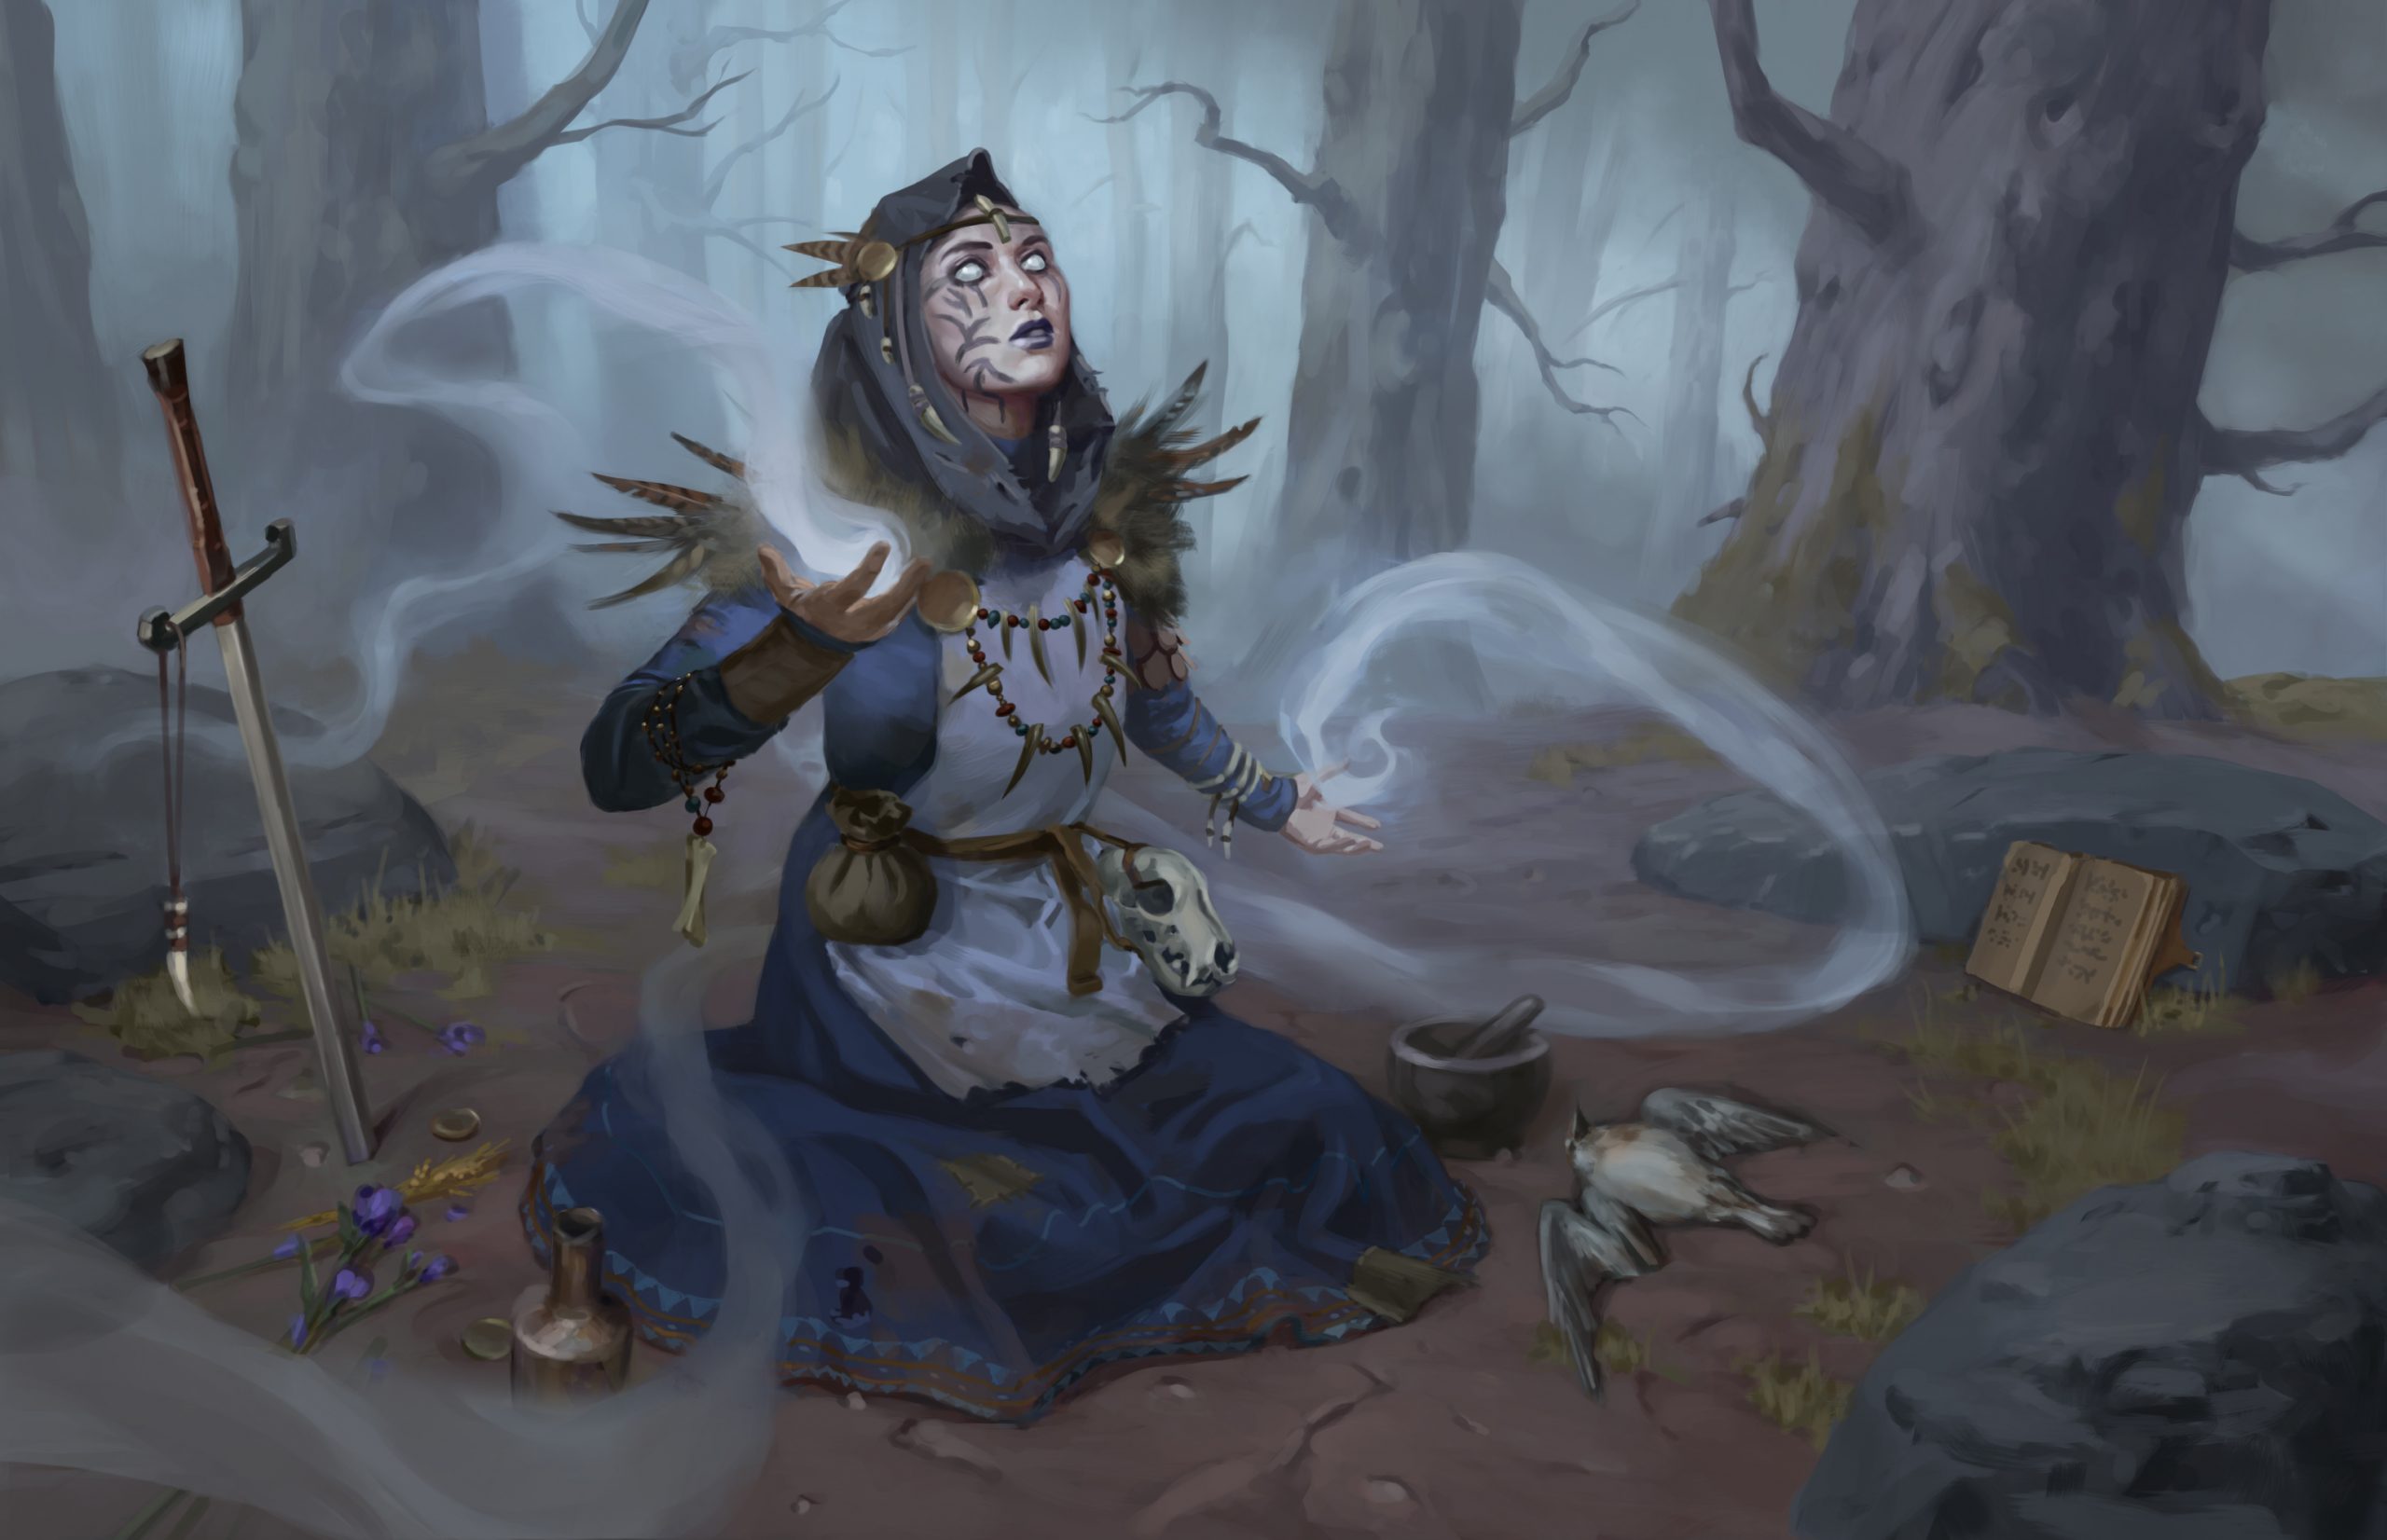 Grim Hollow: A witch casting a ritual spell